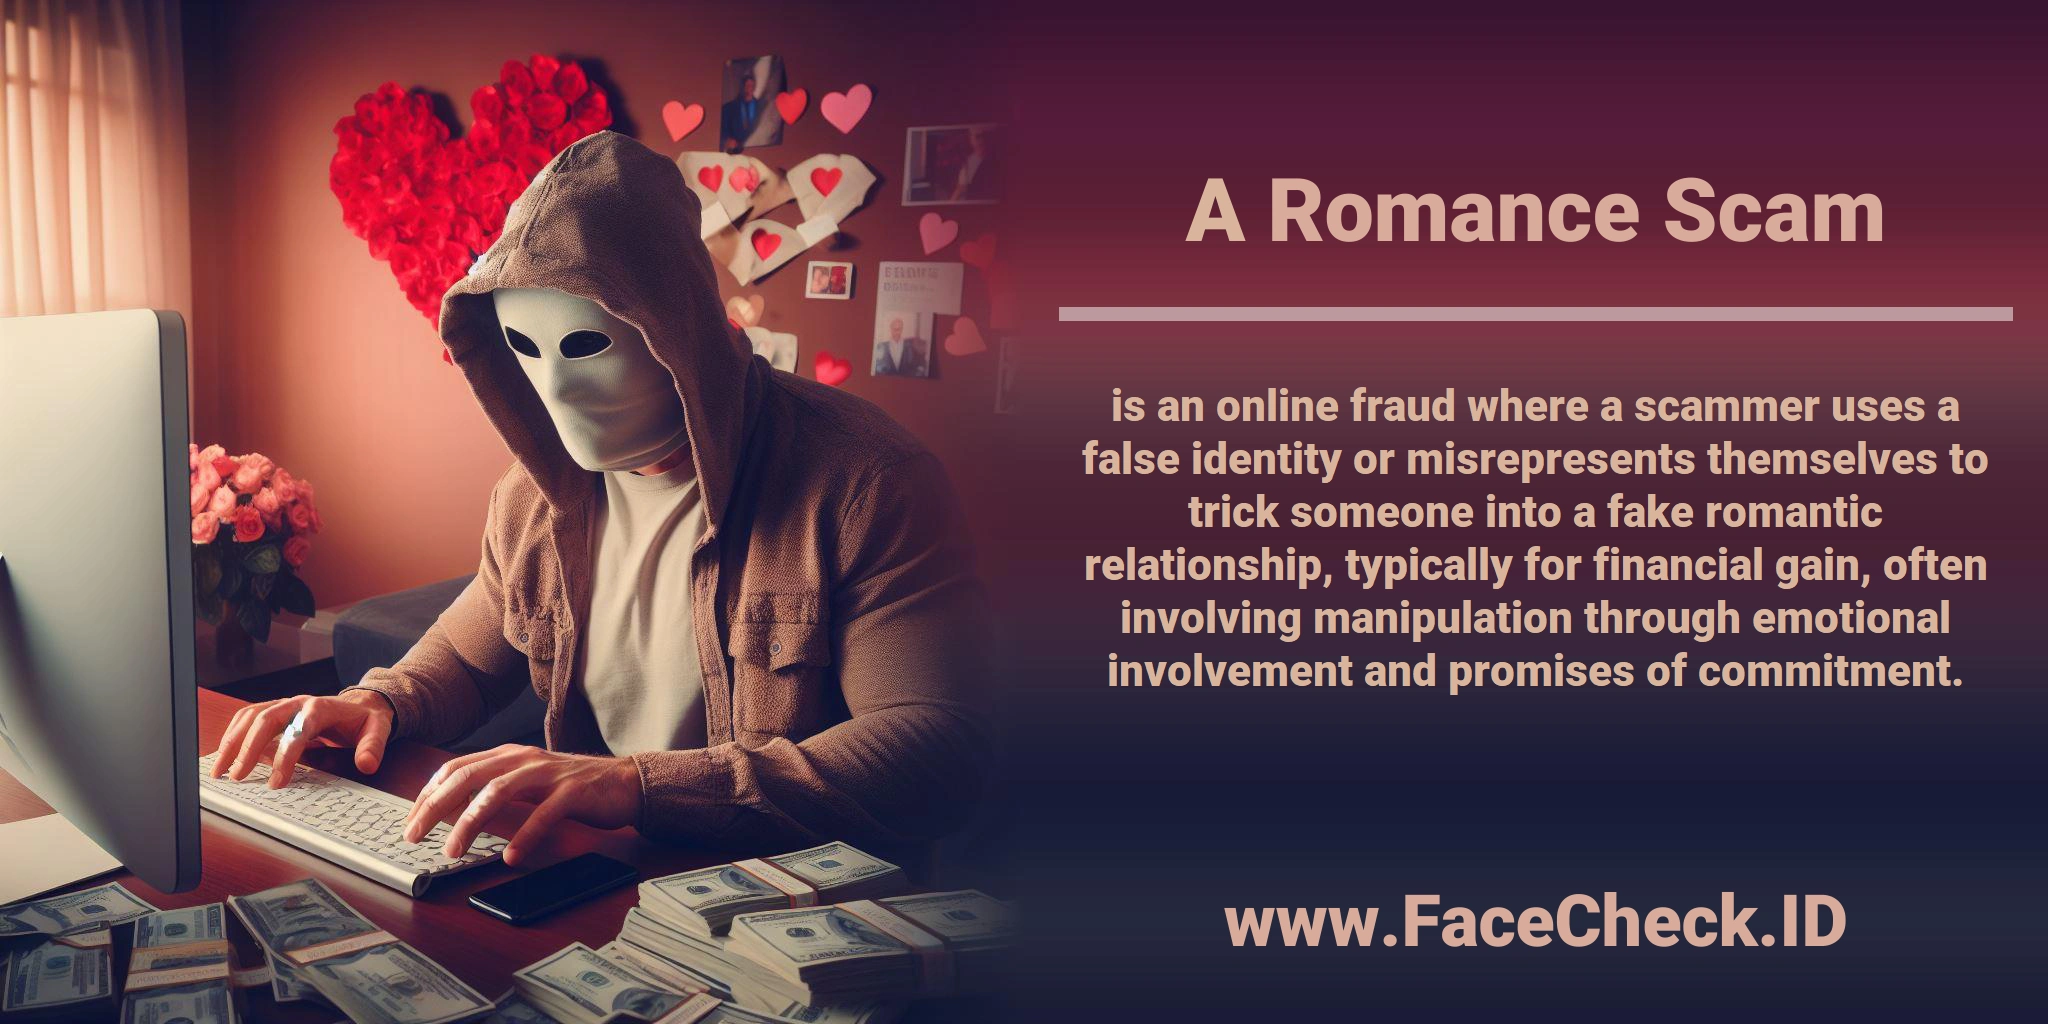 A <b>Romance Scam</b> is an online fraud where a scammer uses a false identity or misrepresents themselves to trick someone into a fake romantic relationship, typically for financial gain, often involving manipulation through emotional involvement and promises of commitment.